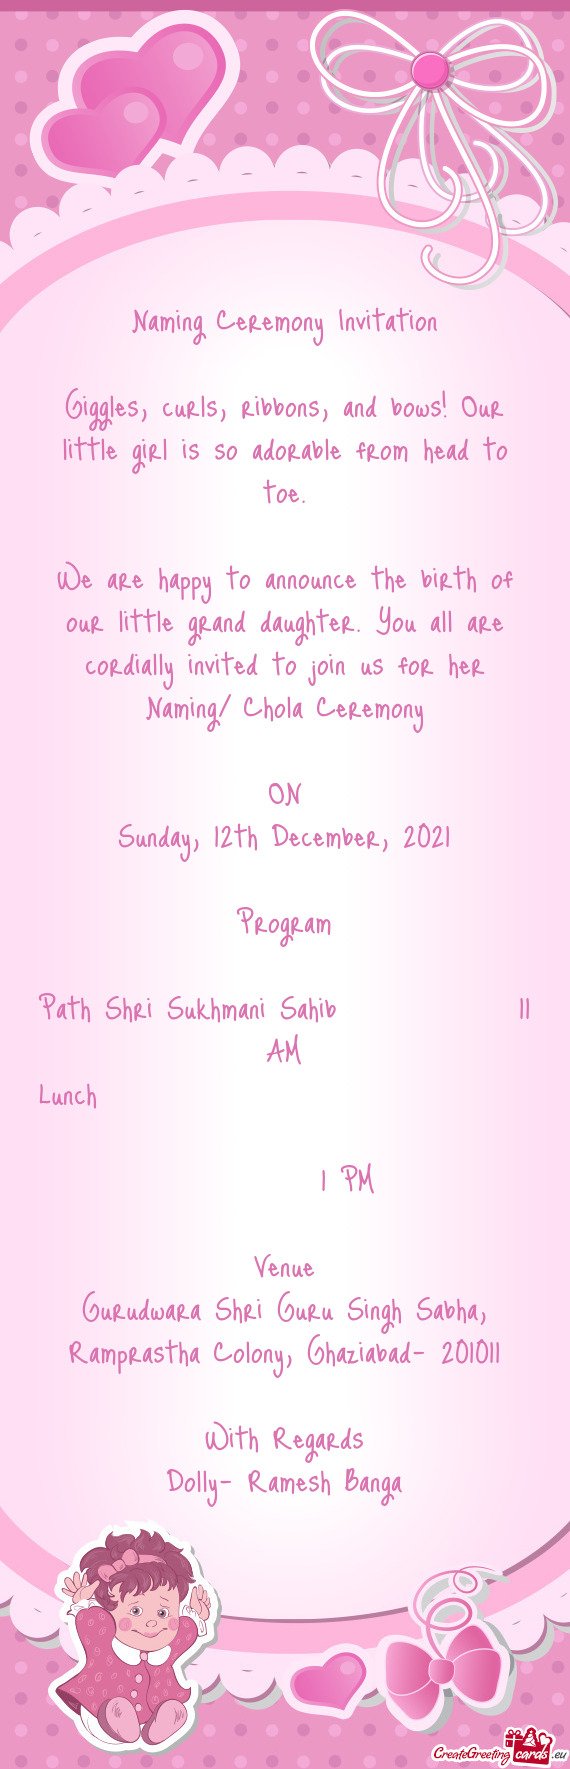 We are happy to announce the birth of our little grand daughter. You all are cordially invited to jo